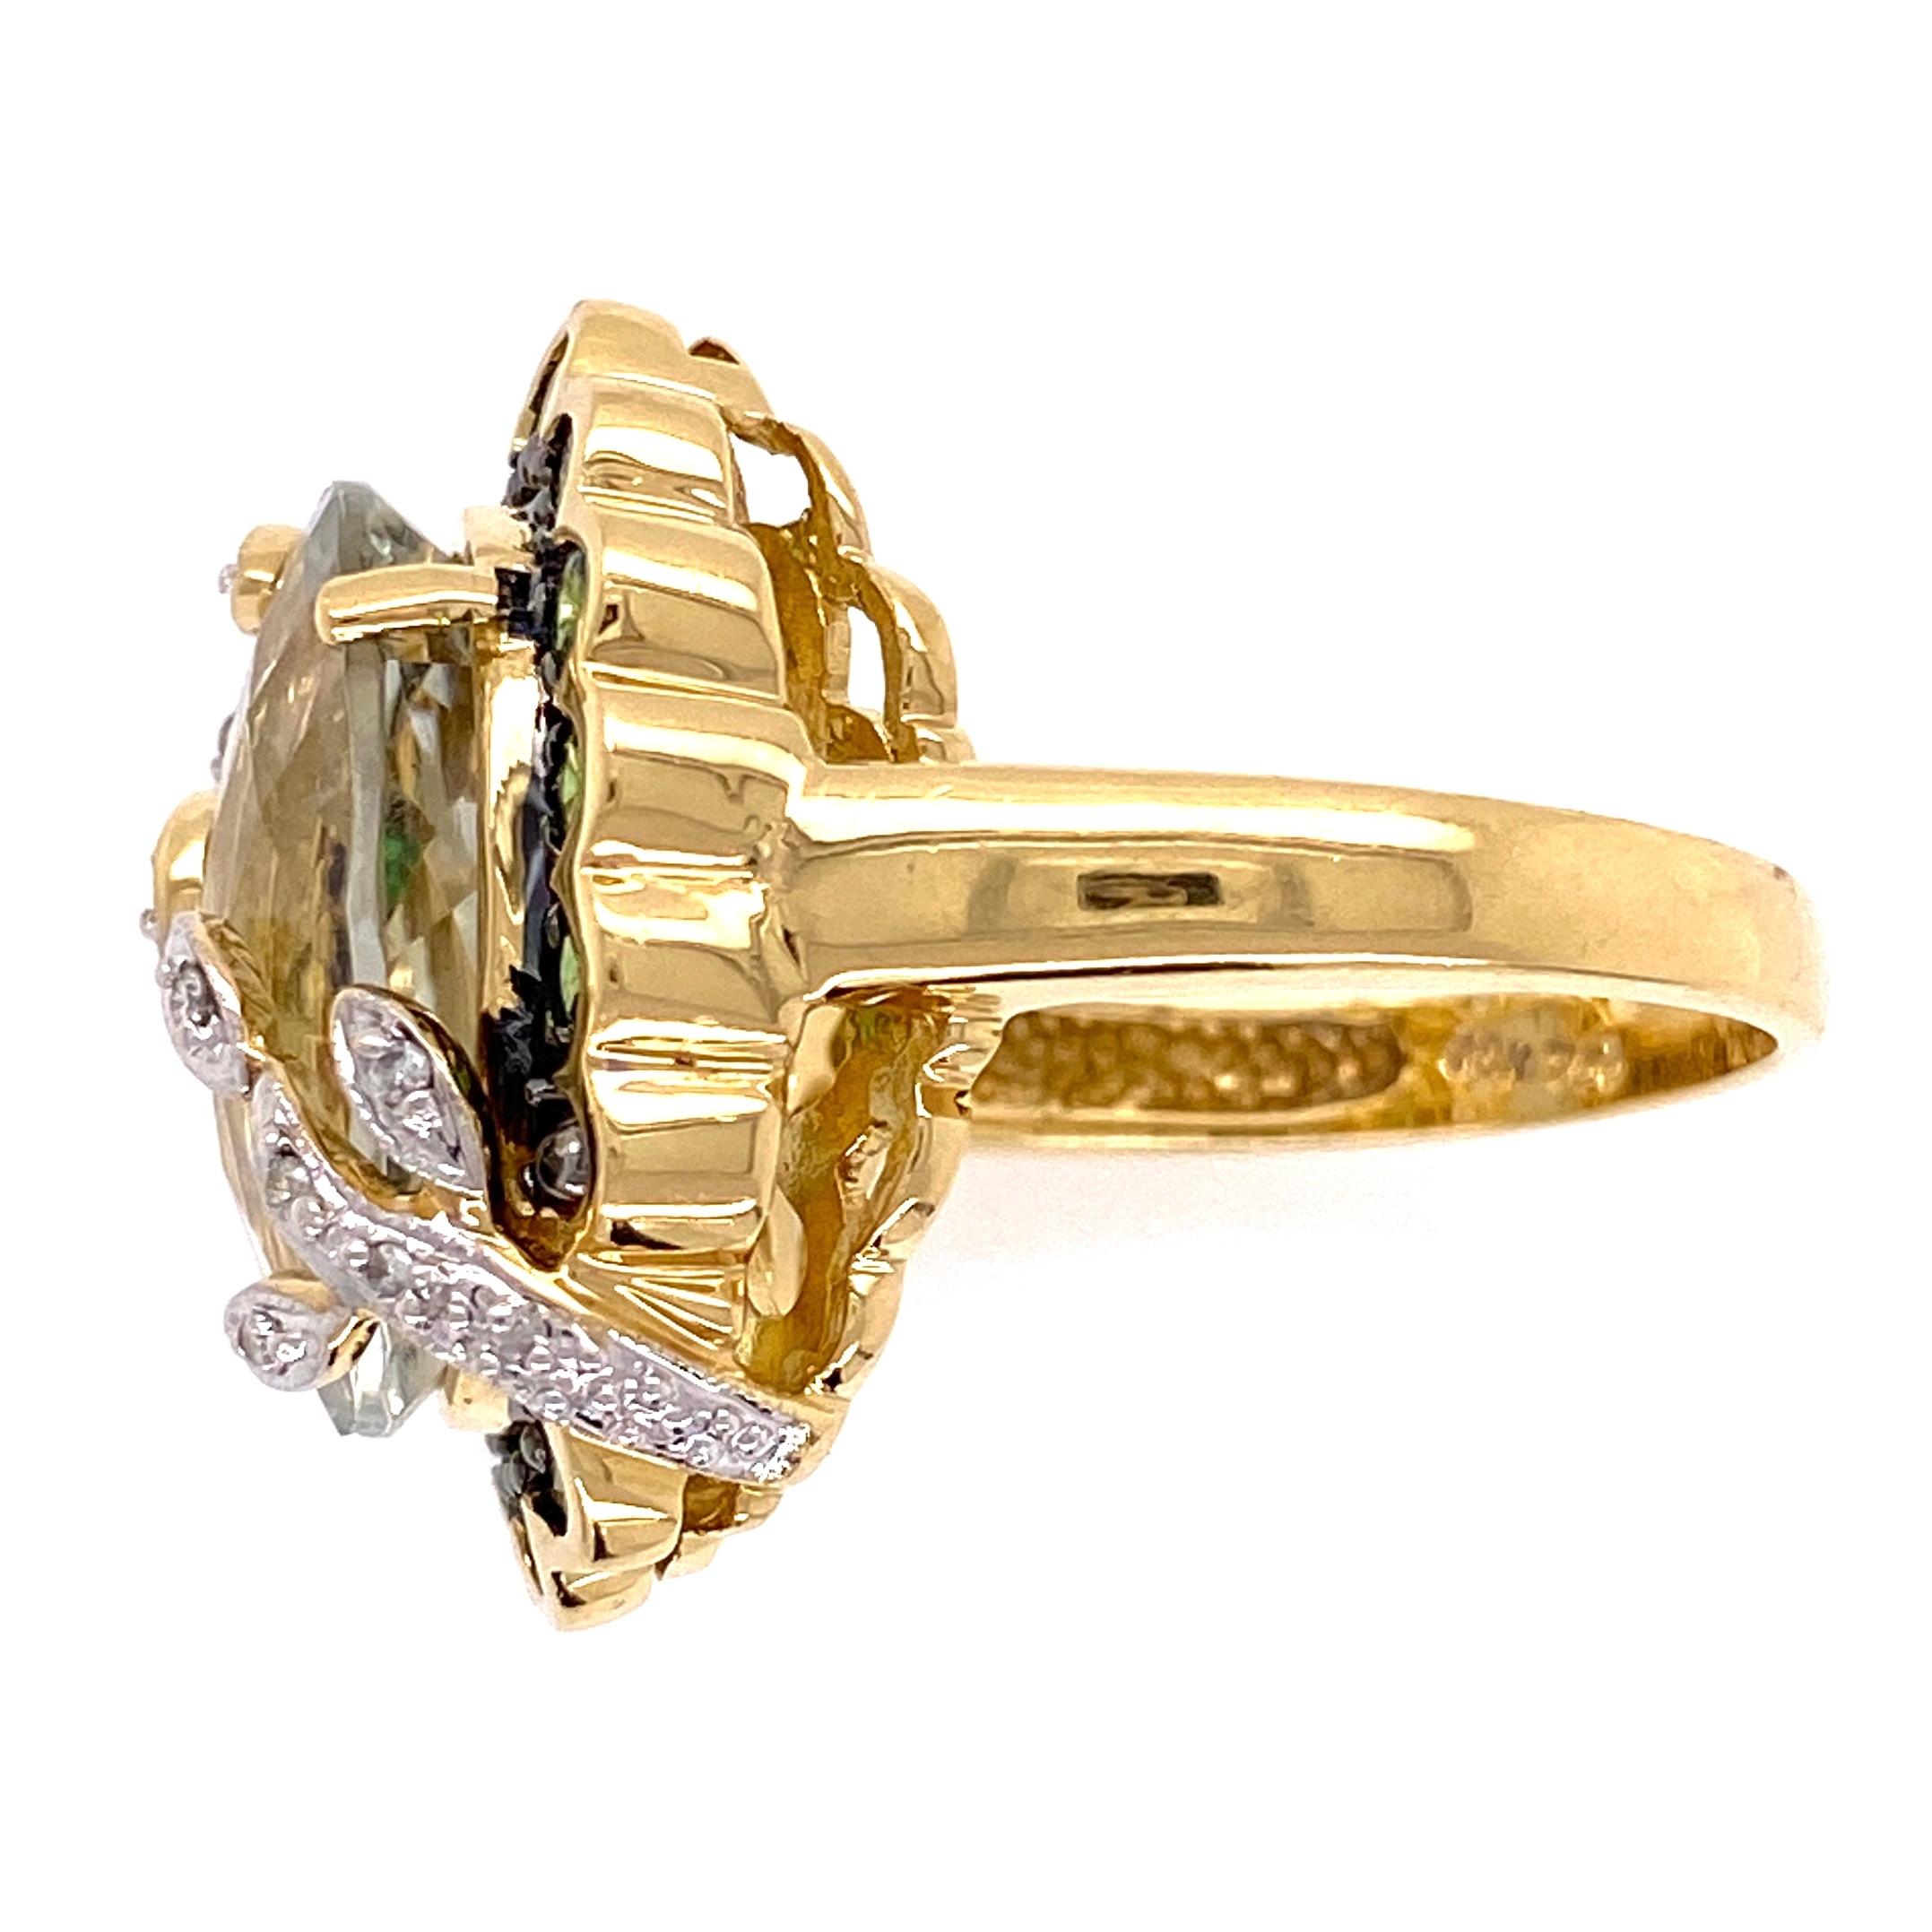 Fabulous Cocktail Ring. Center securely set with a 7 Carat Checkerboard Prasiolite, surrounded by Tsavorites and further enhanced with 0.16tw Diamonds. All stones are Hand set. Hand crafted mounting in rich 18K yellow Gold. Ring size 7.25. More